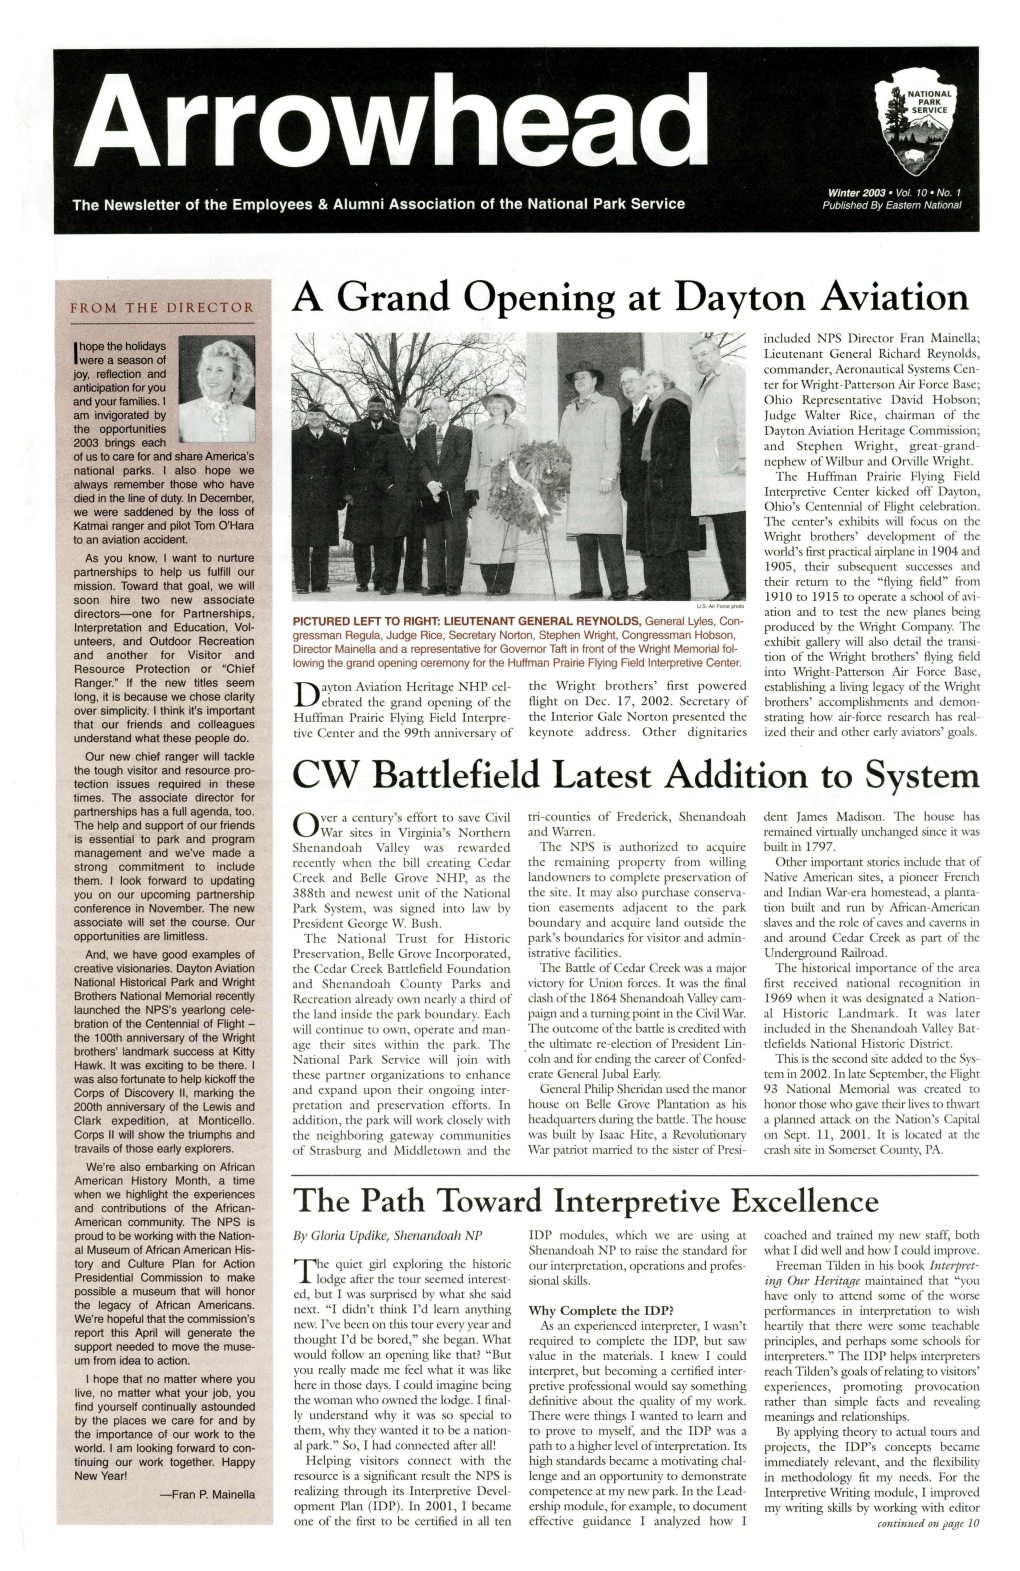 A Grand Opening at Dayton Aviation CW Battlefield Latest Addition To